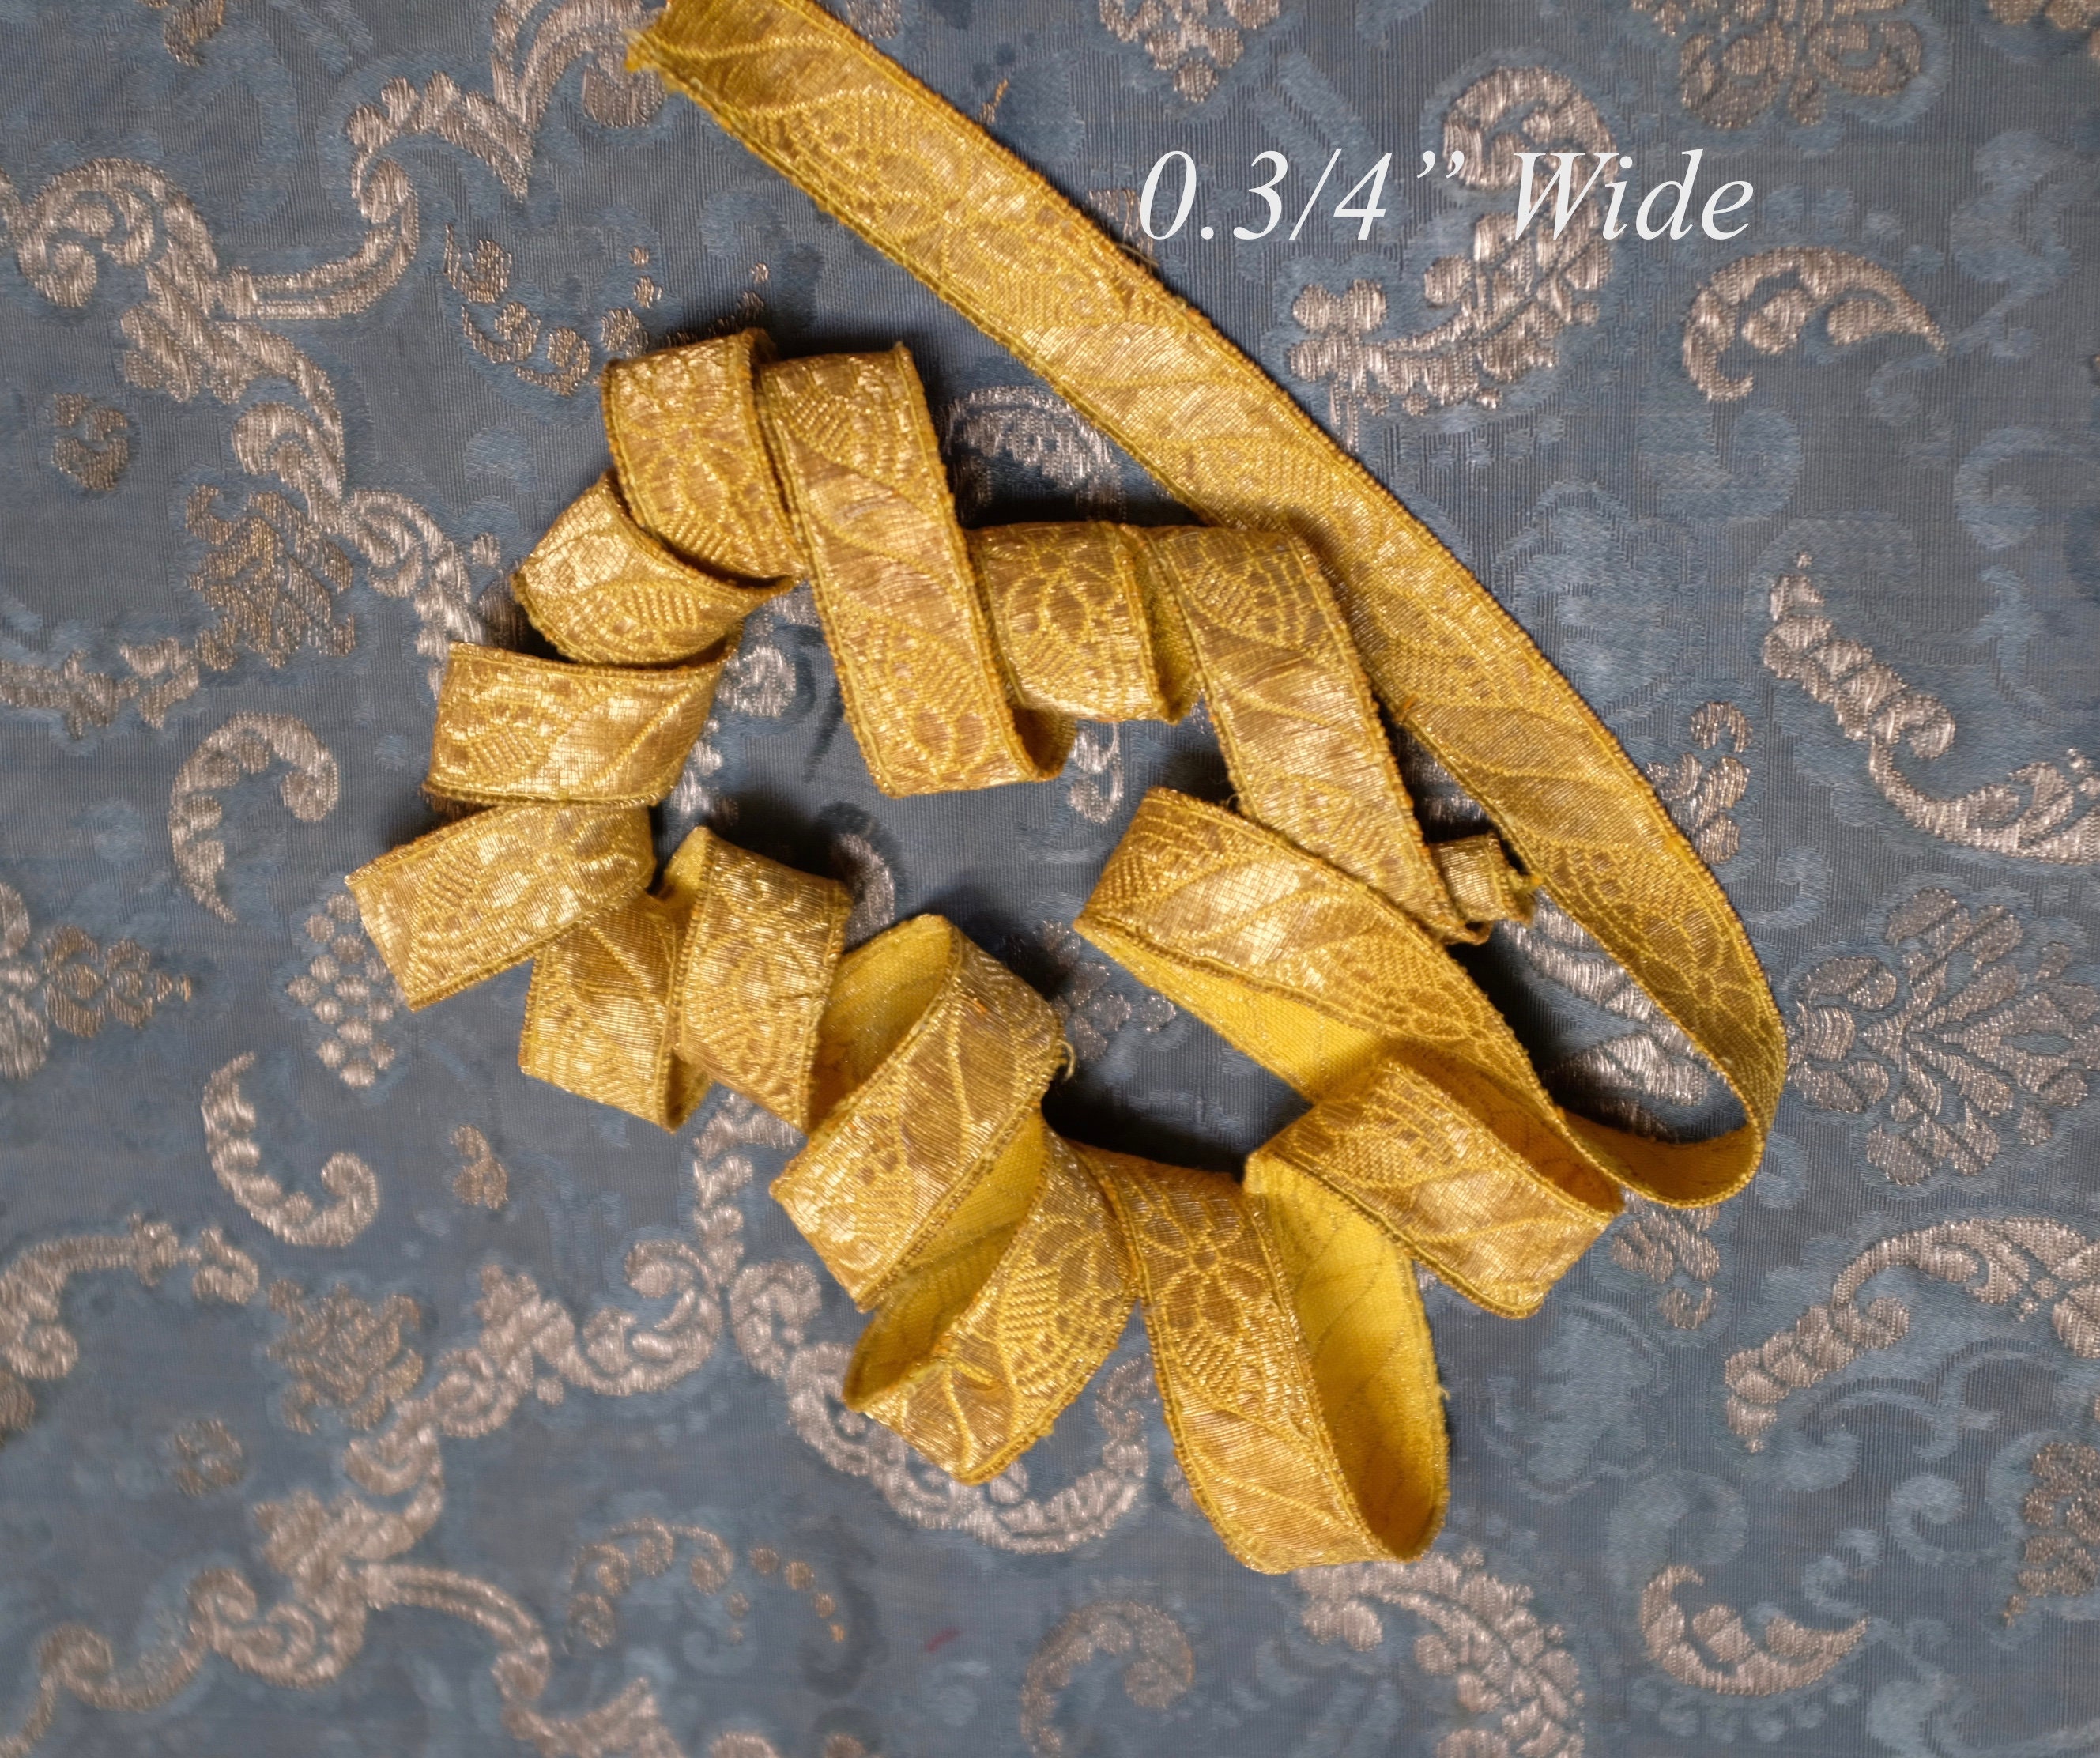 Antique French Ombre and Gold Metal Ribbon – Vintage Passementerie